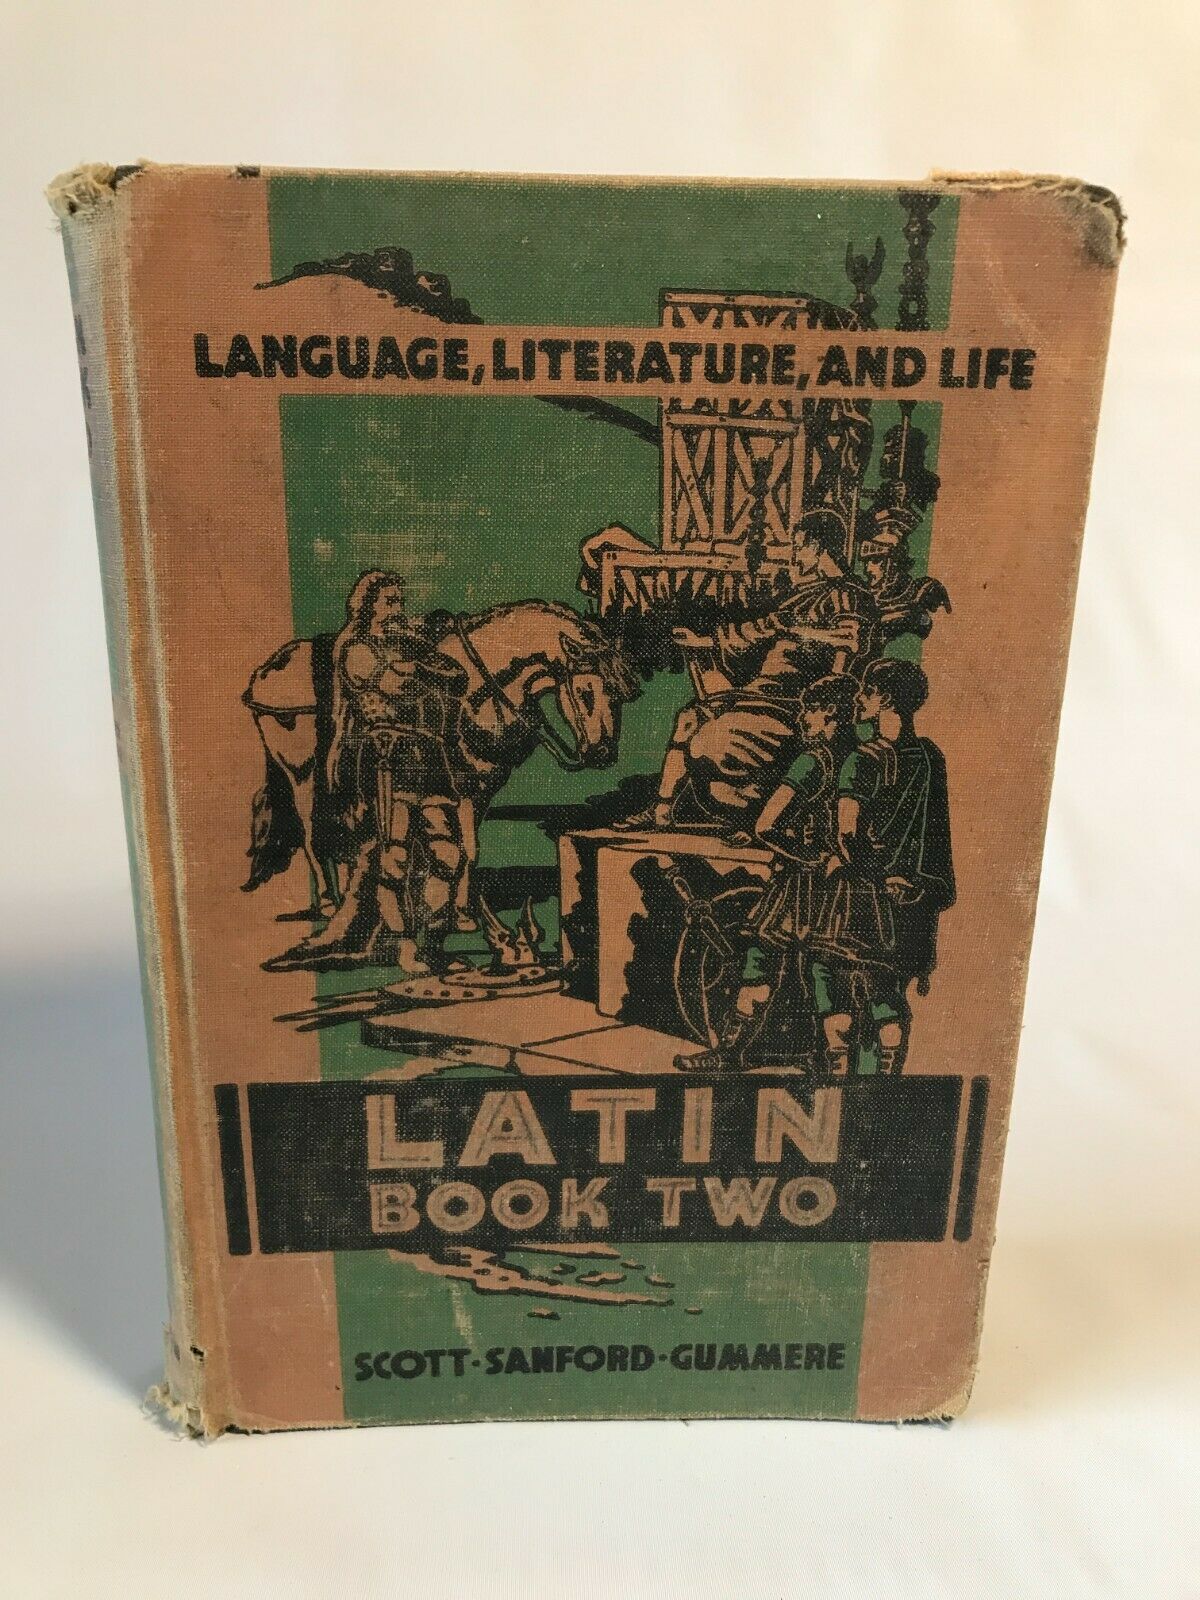 Latin Book Two Language, Literature and Life by scott-sanford-gummere